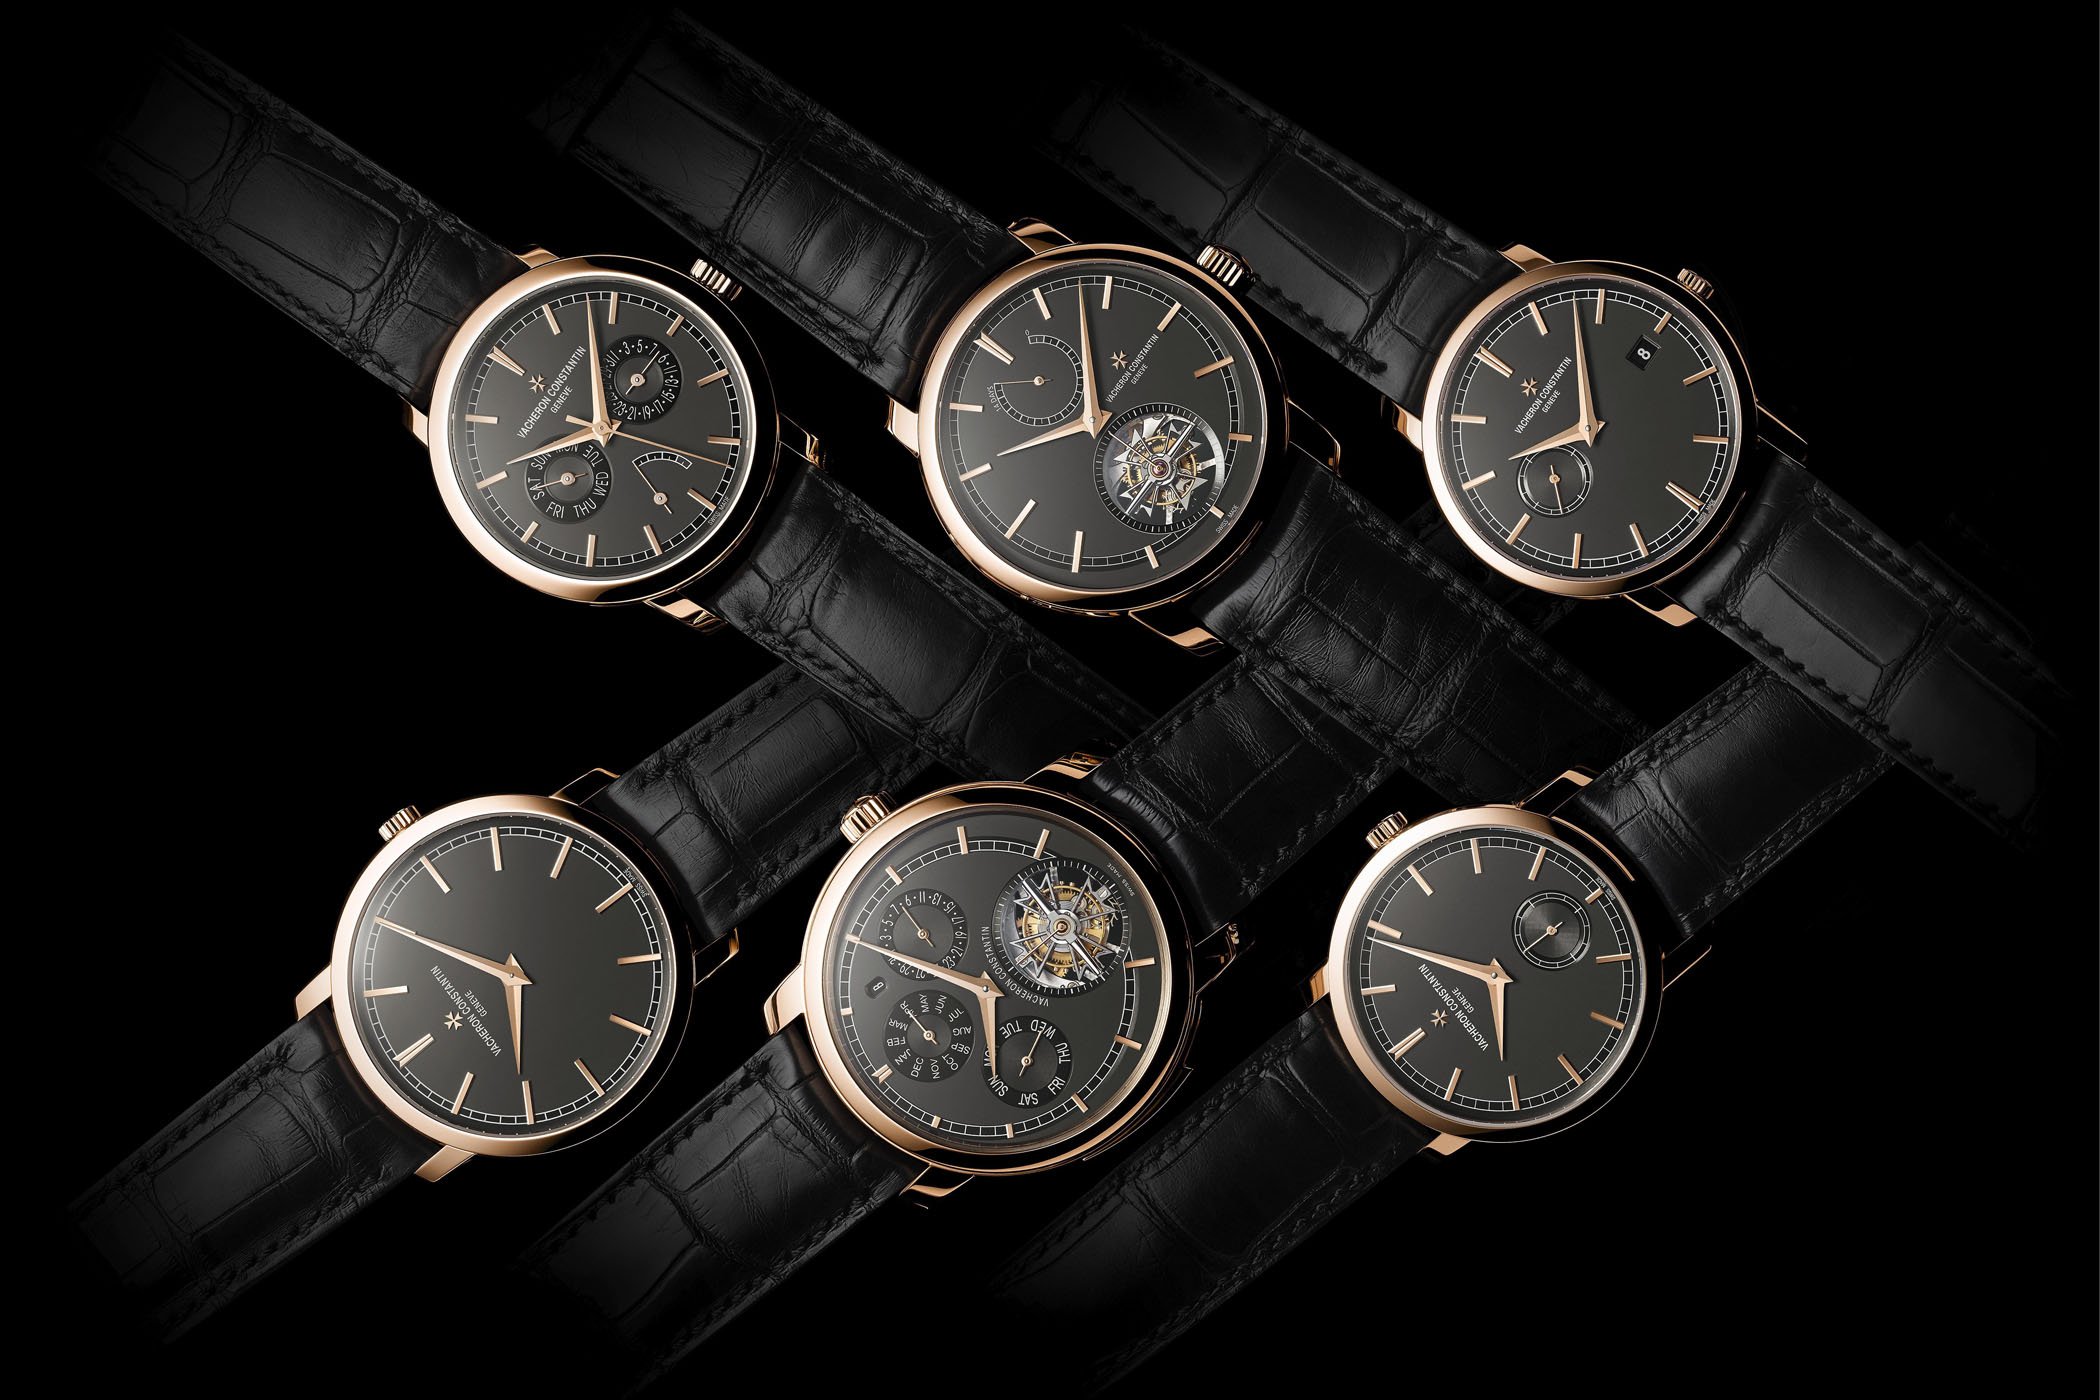 Vacheron Constantin Traditionnelle slate grey pink gold collection